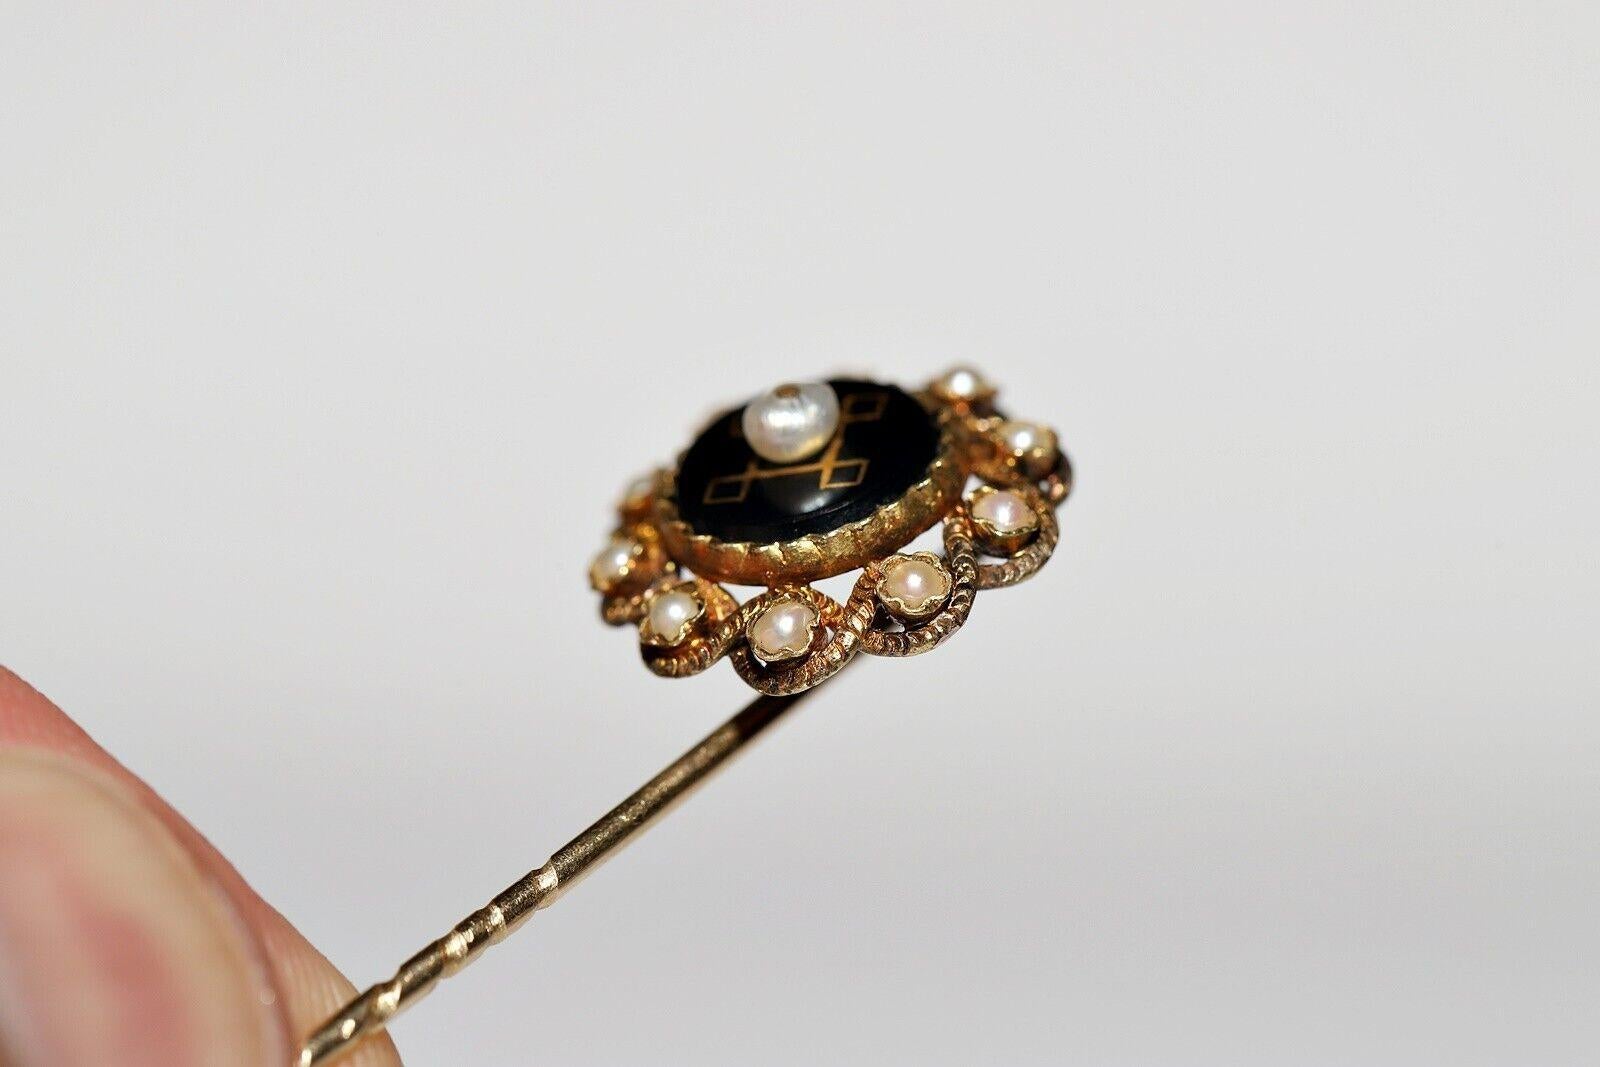  Antique Original Circa 1900s 14k Gold Natural Pearl And Onyx Decorated Brooch For Sale 5